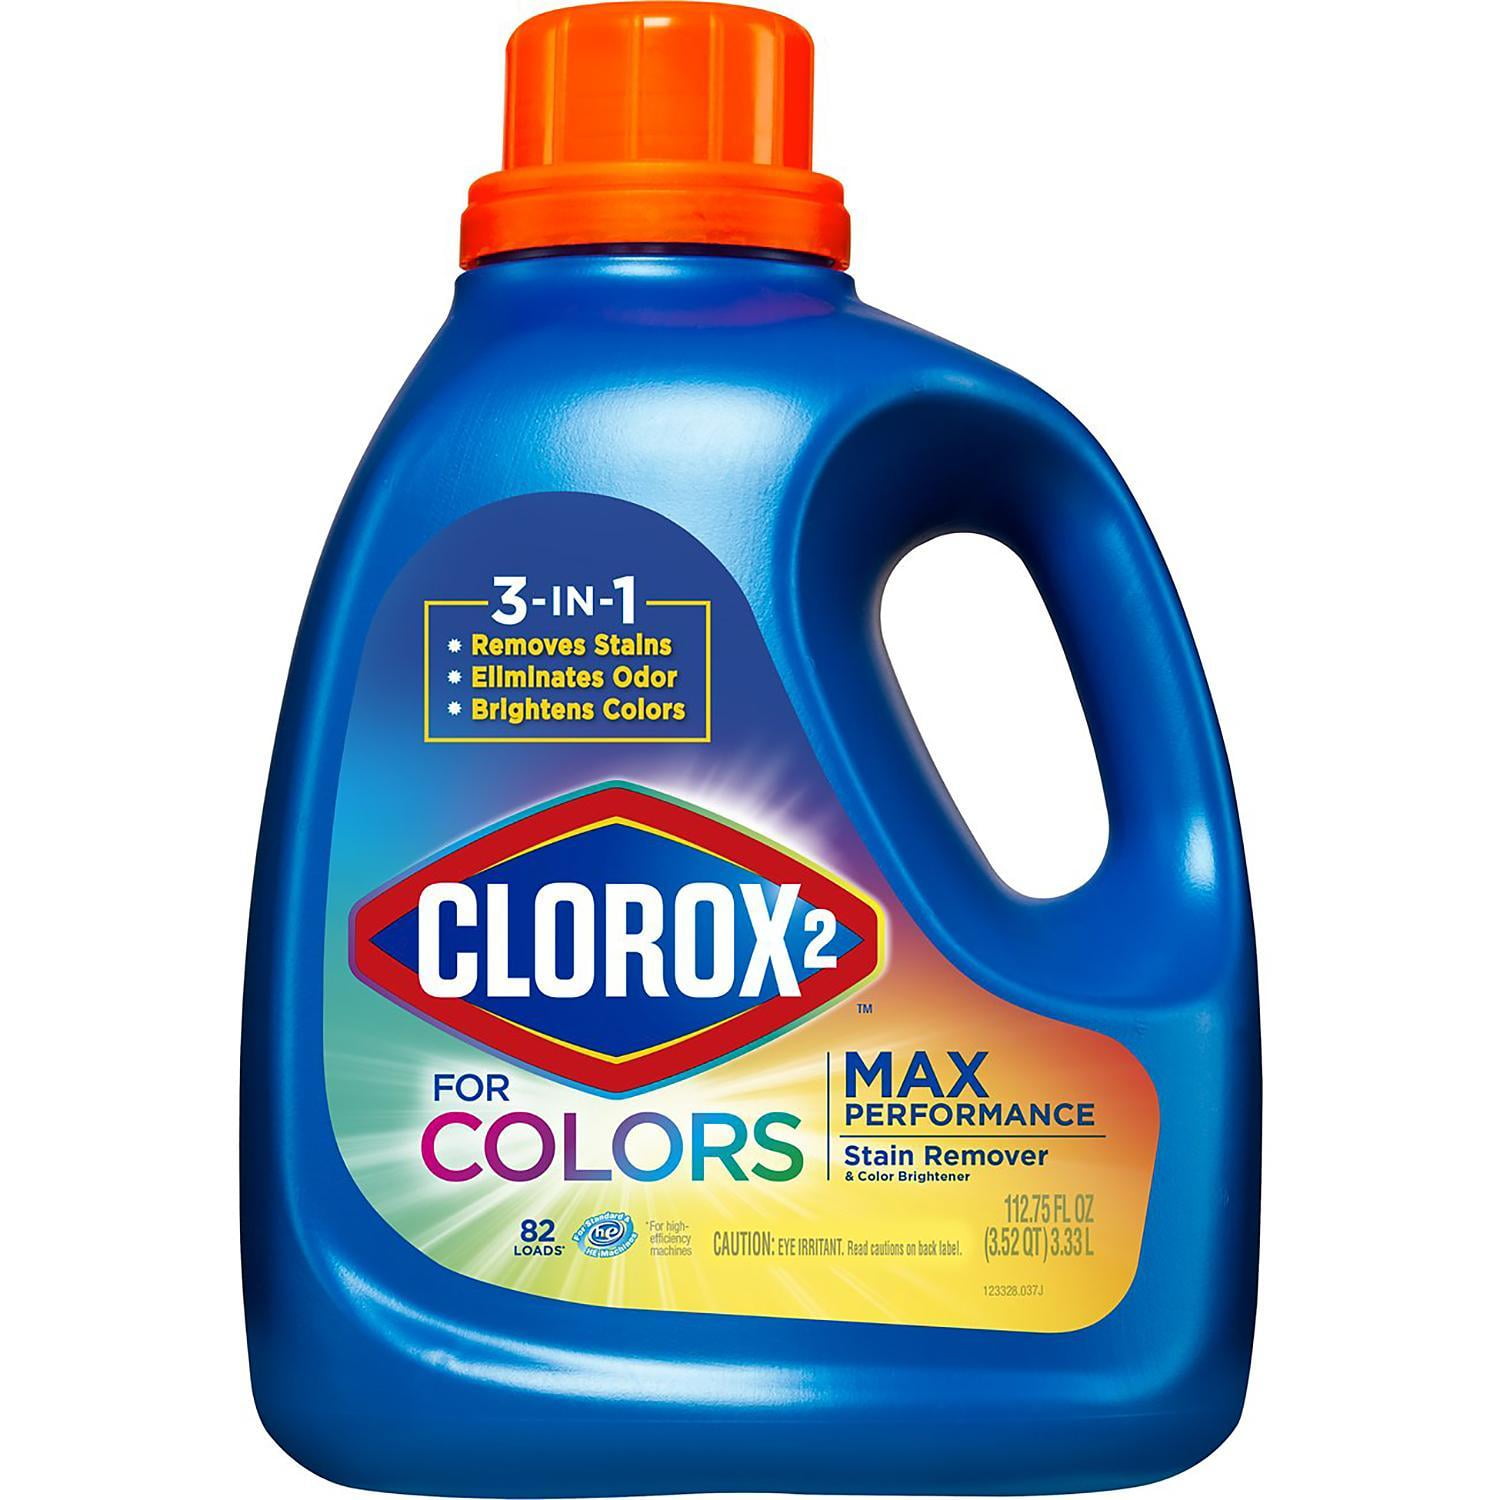 Clorox 2 ™ for Colors - Max Performance Stain Remover and Color Brightener,...